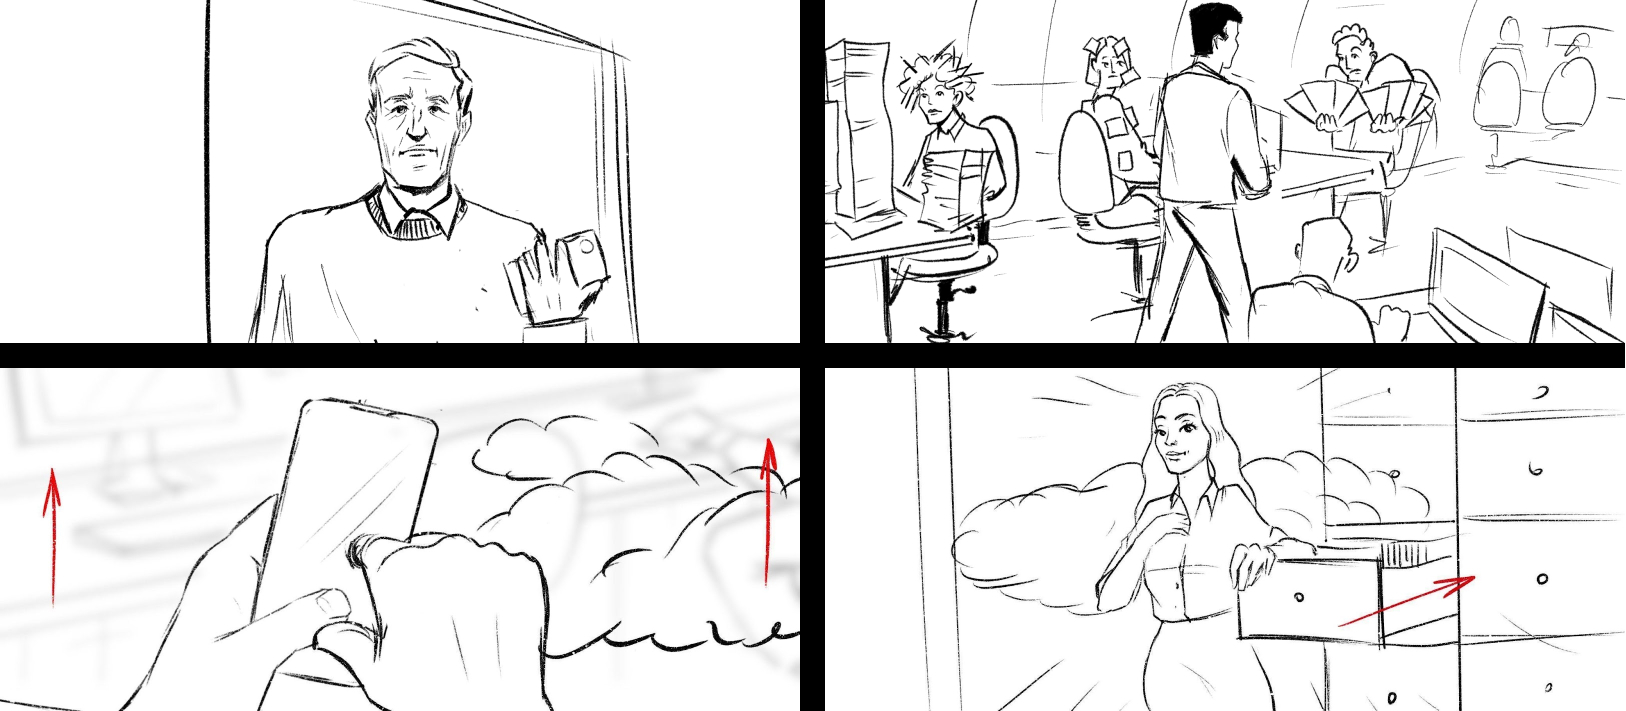 storyboard for hexaware promo video